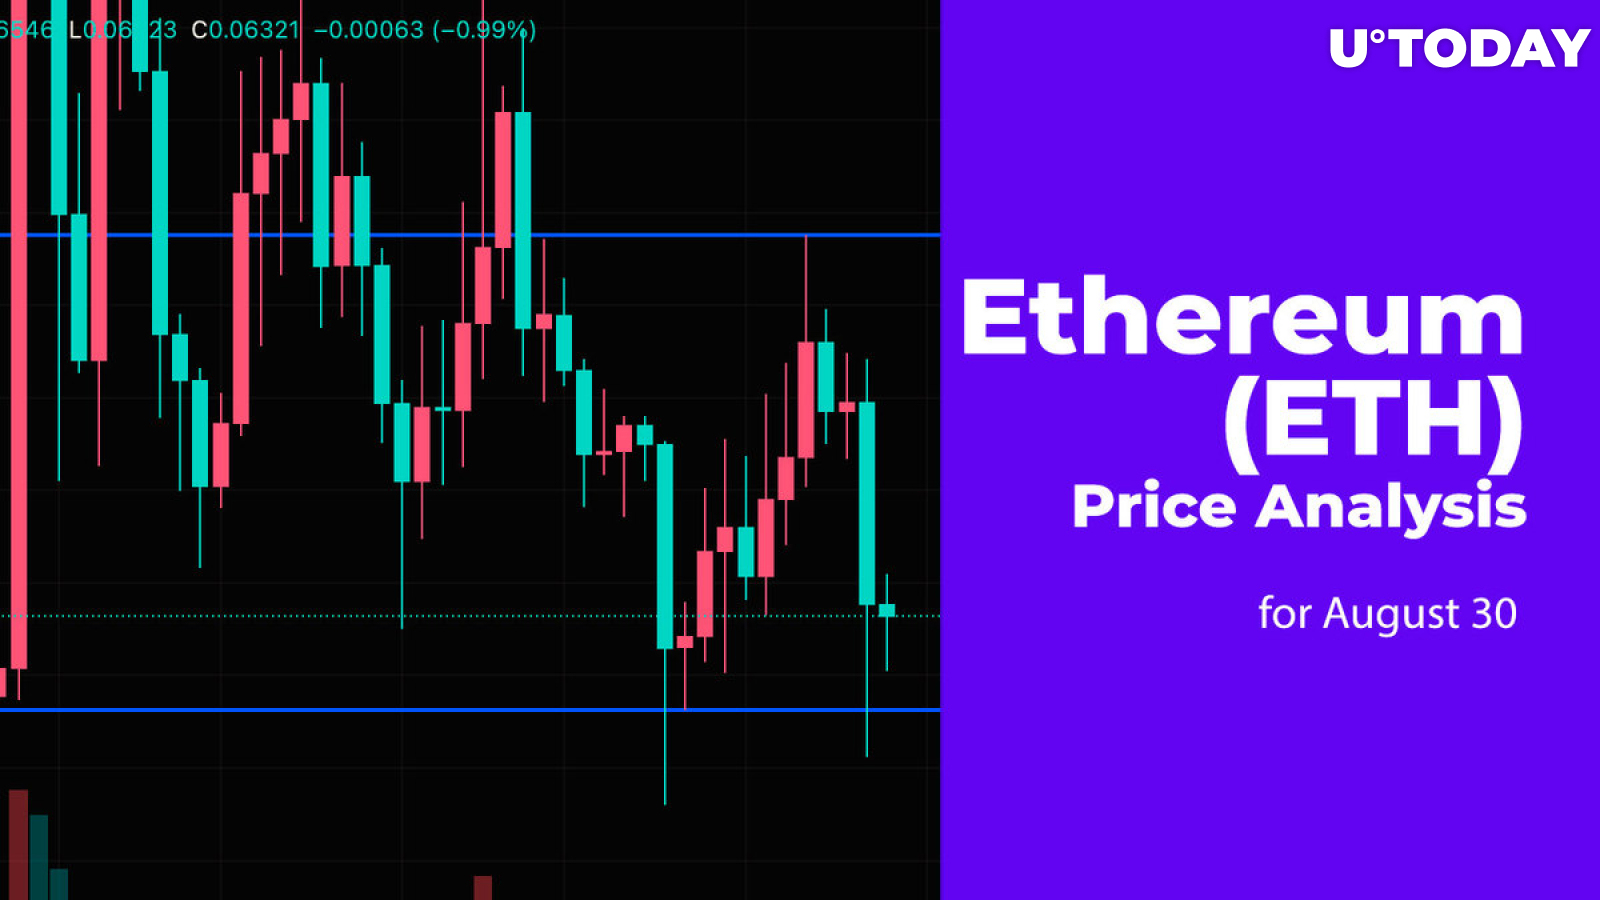 Ethereum (ETH) Price Analysis for August 30